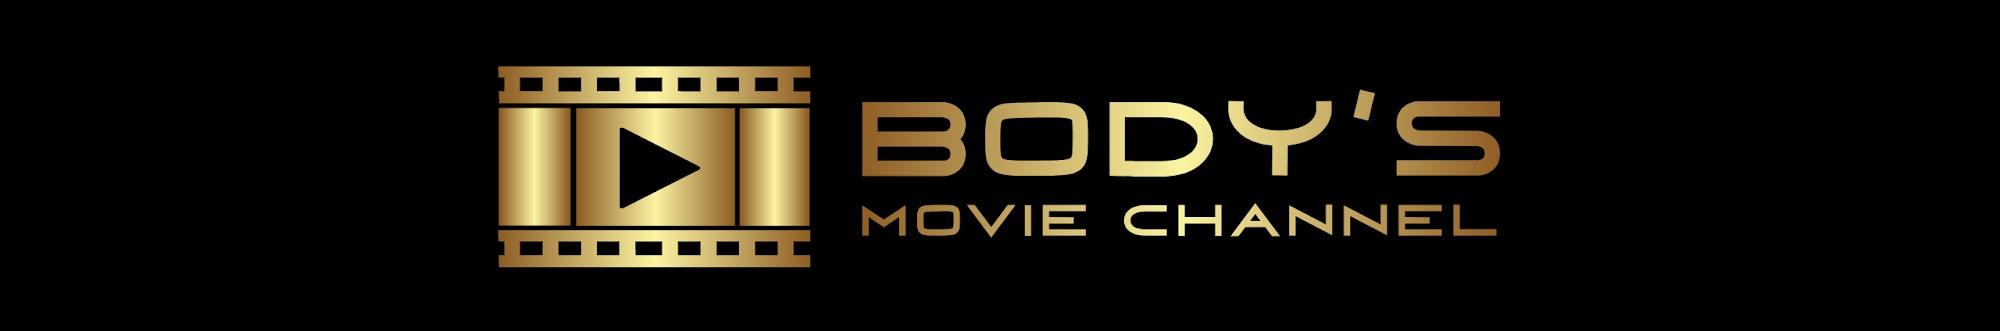 Body's Movie Channel